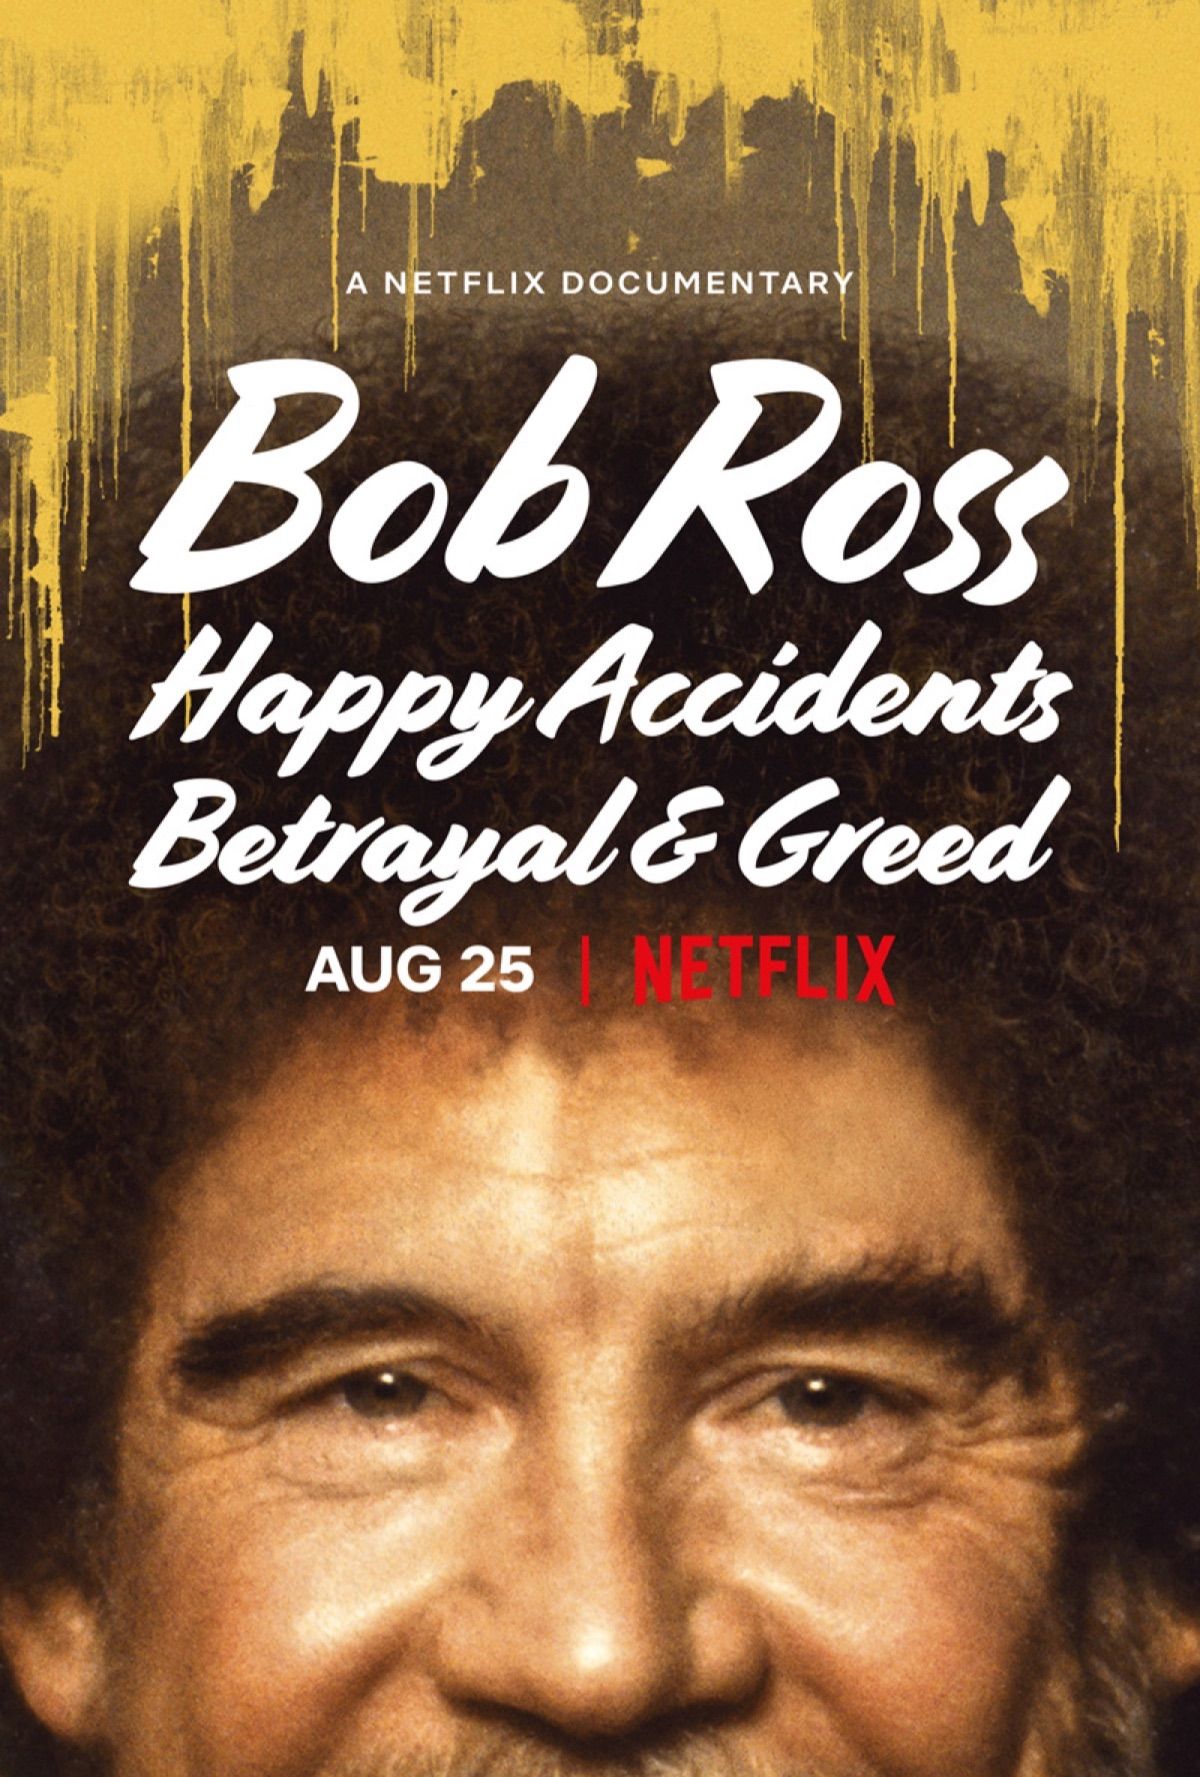 bob-ross-happy-accidents-documentary-trailer-poster